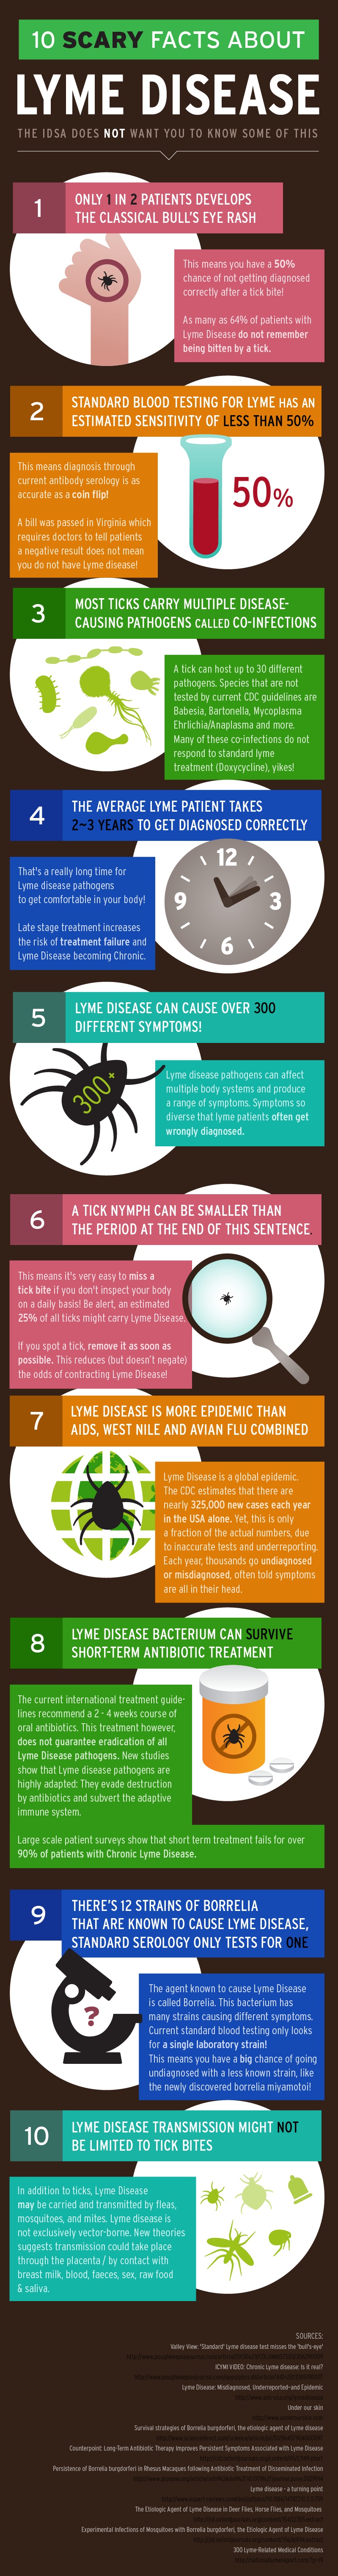 10 scary facts about lyme disease